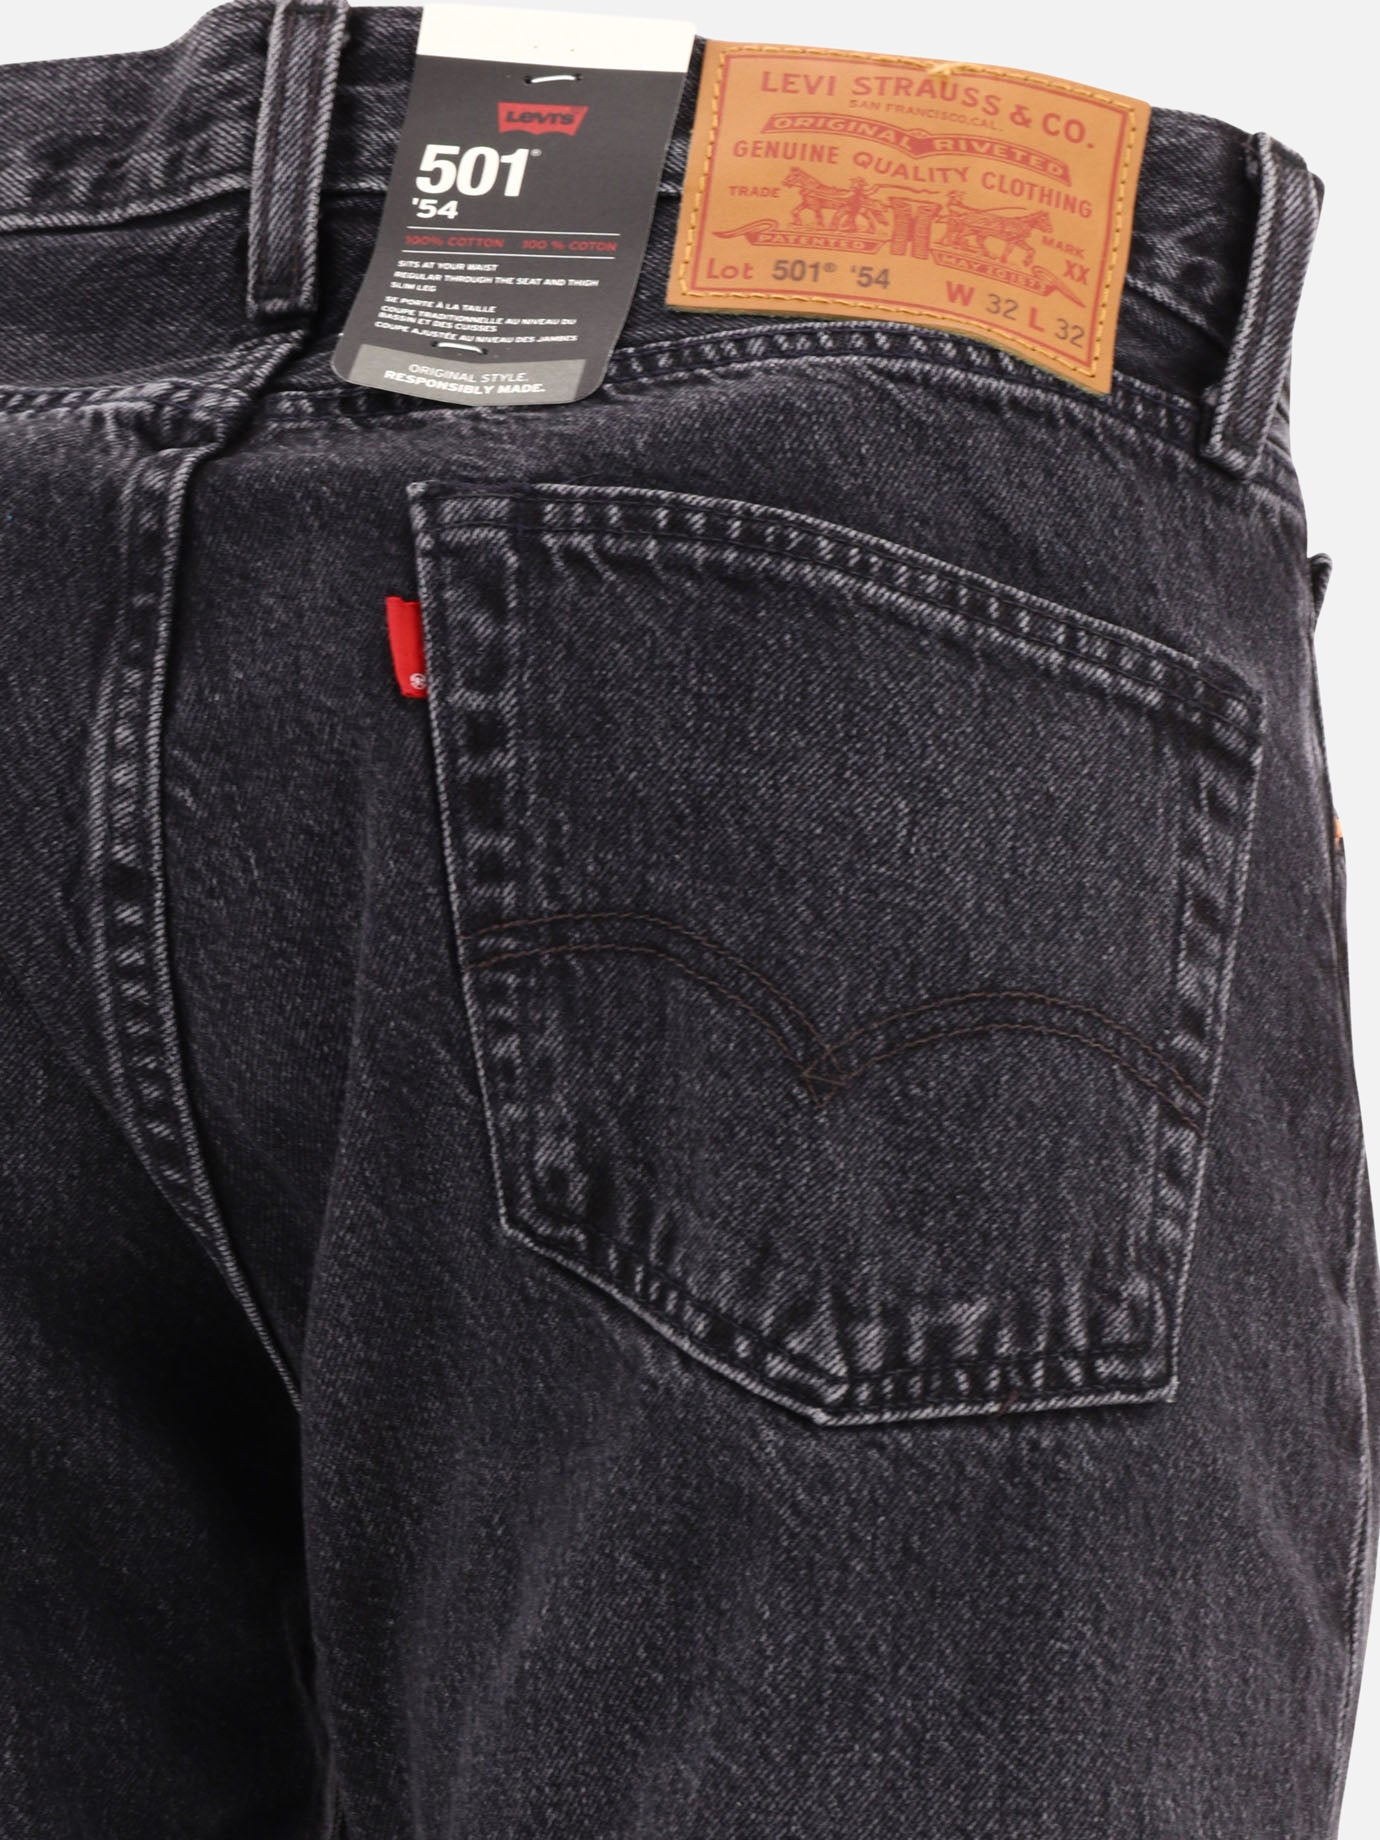 "501® '54" jeans